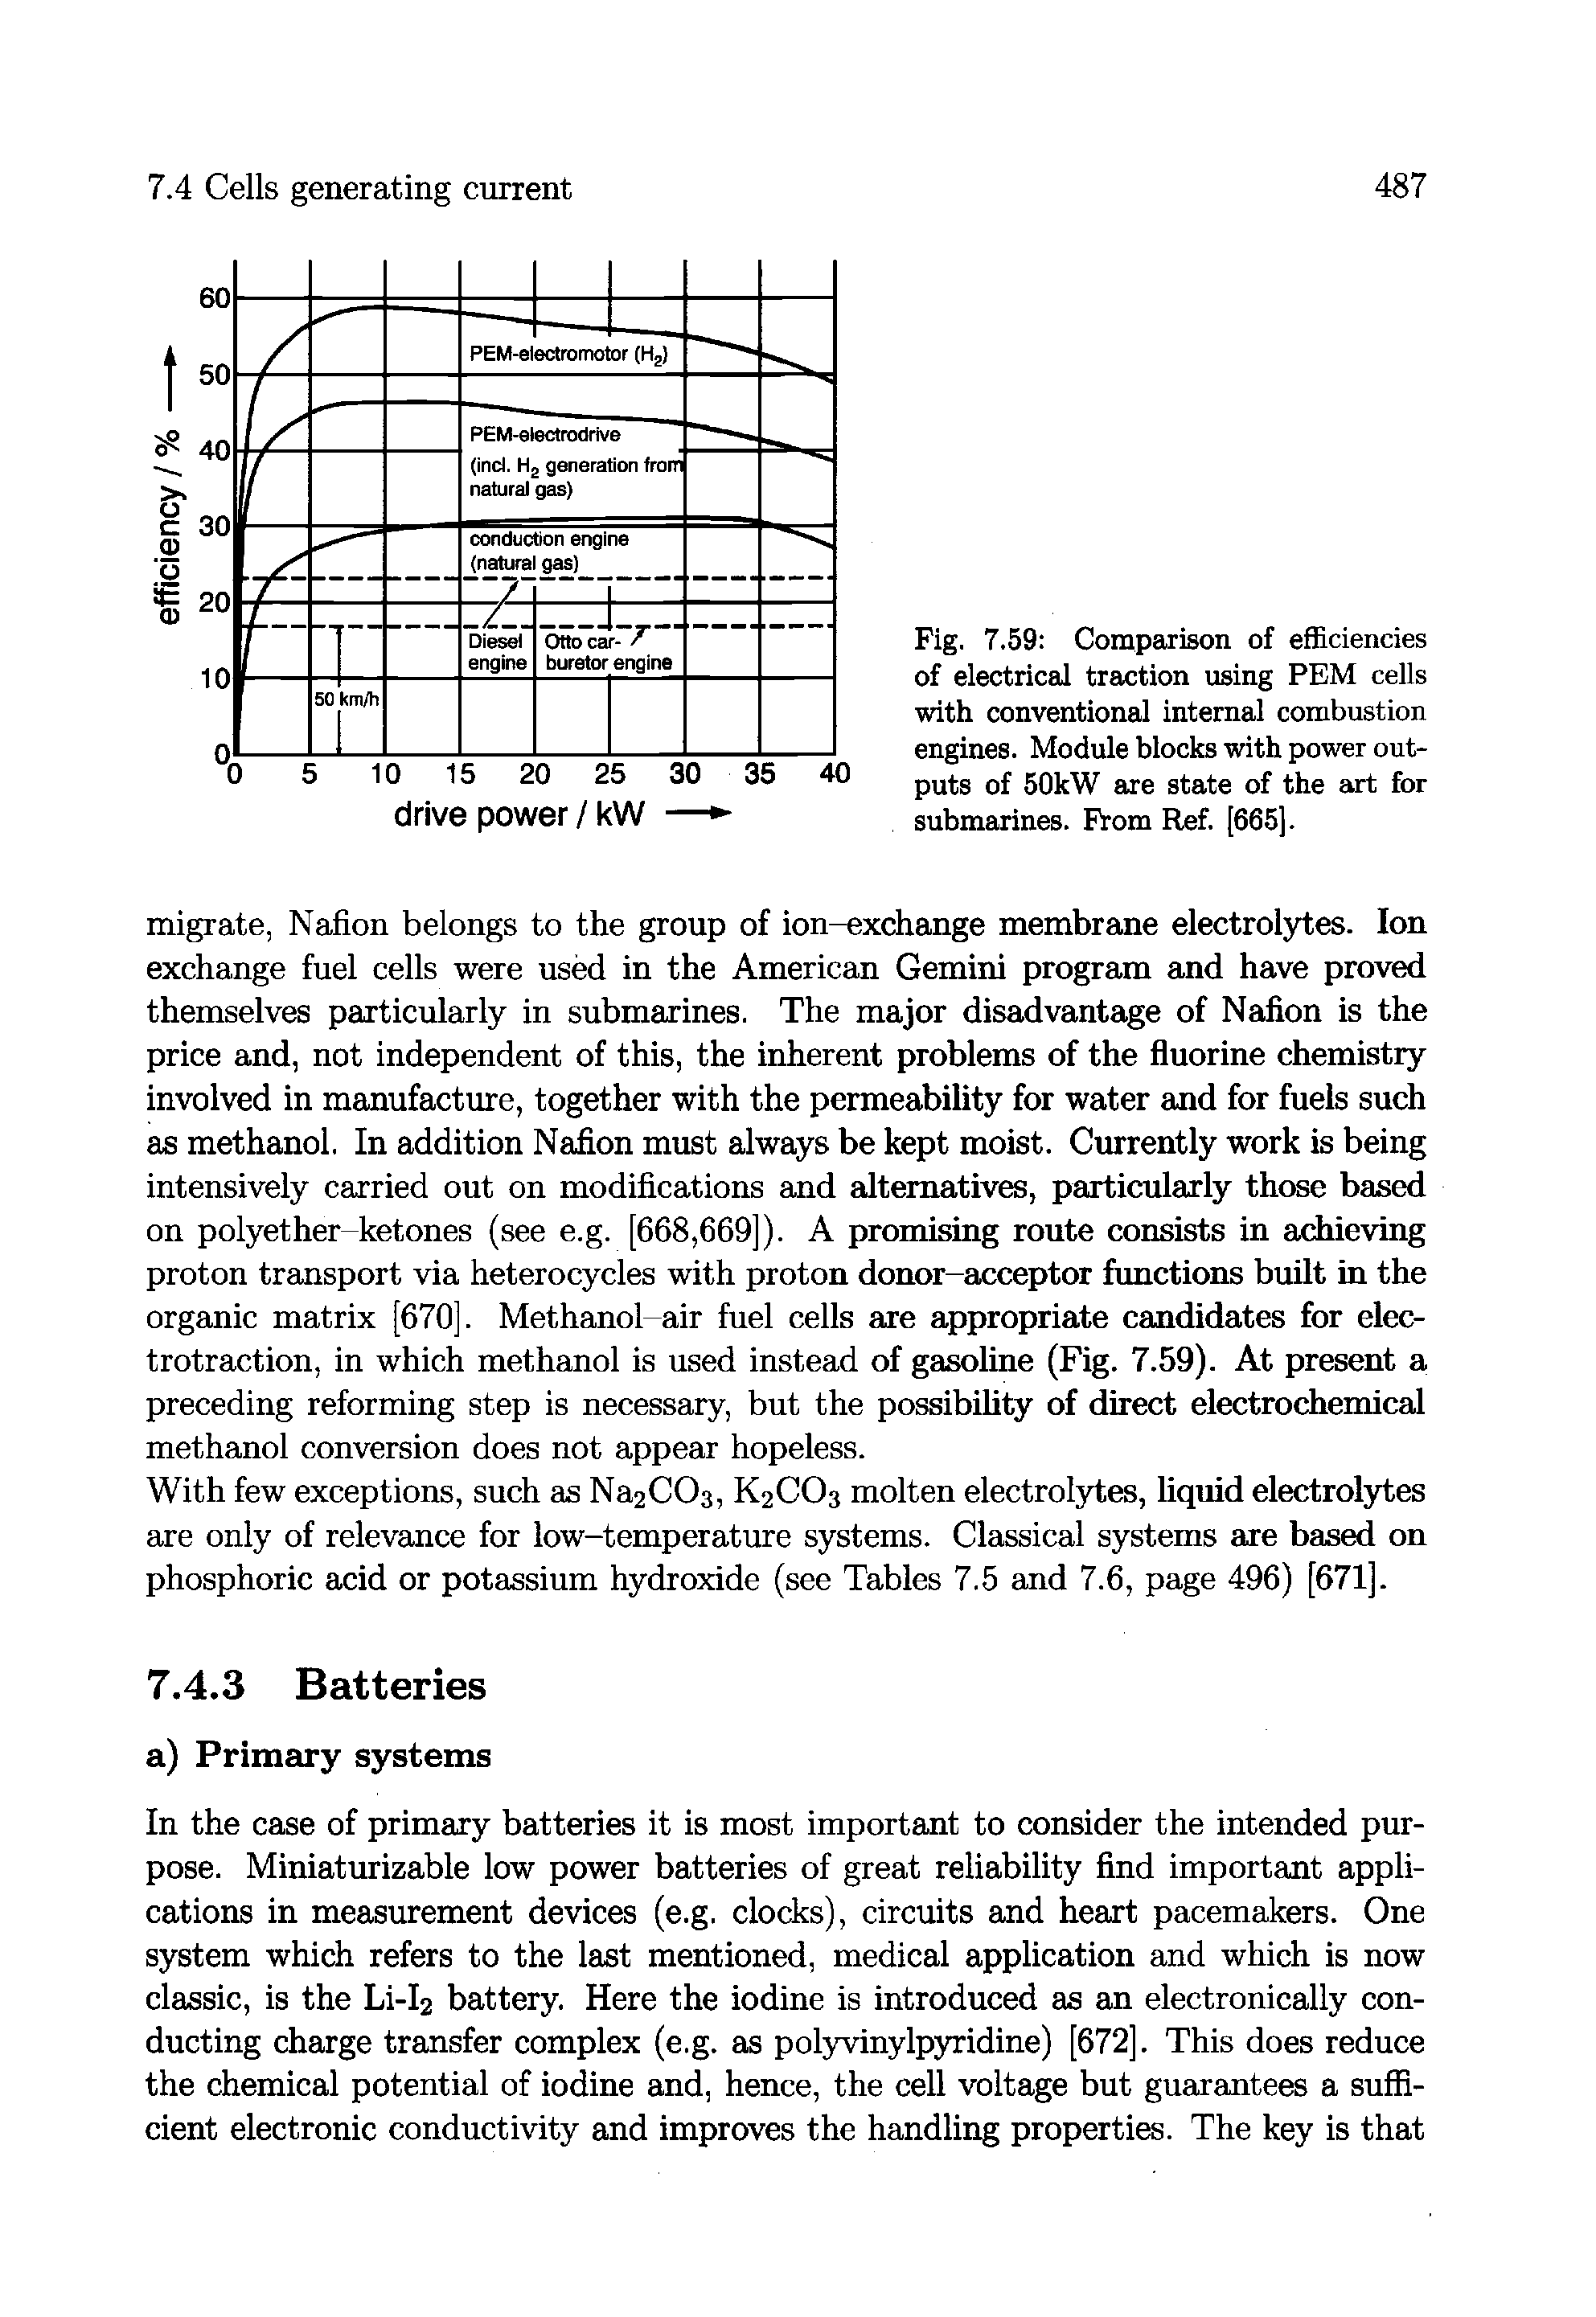 Fig. 7.59 Comparison of efficiencies of electrical traction using PEM cells with conventional internal combustion engines. Module blocks with power outputs of 50kW are state of the art for submarines. Prom Ref. [665].